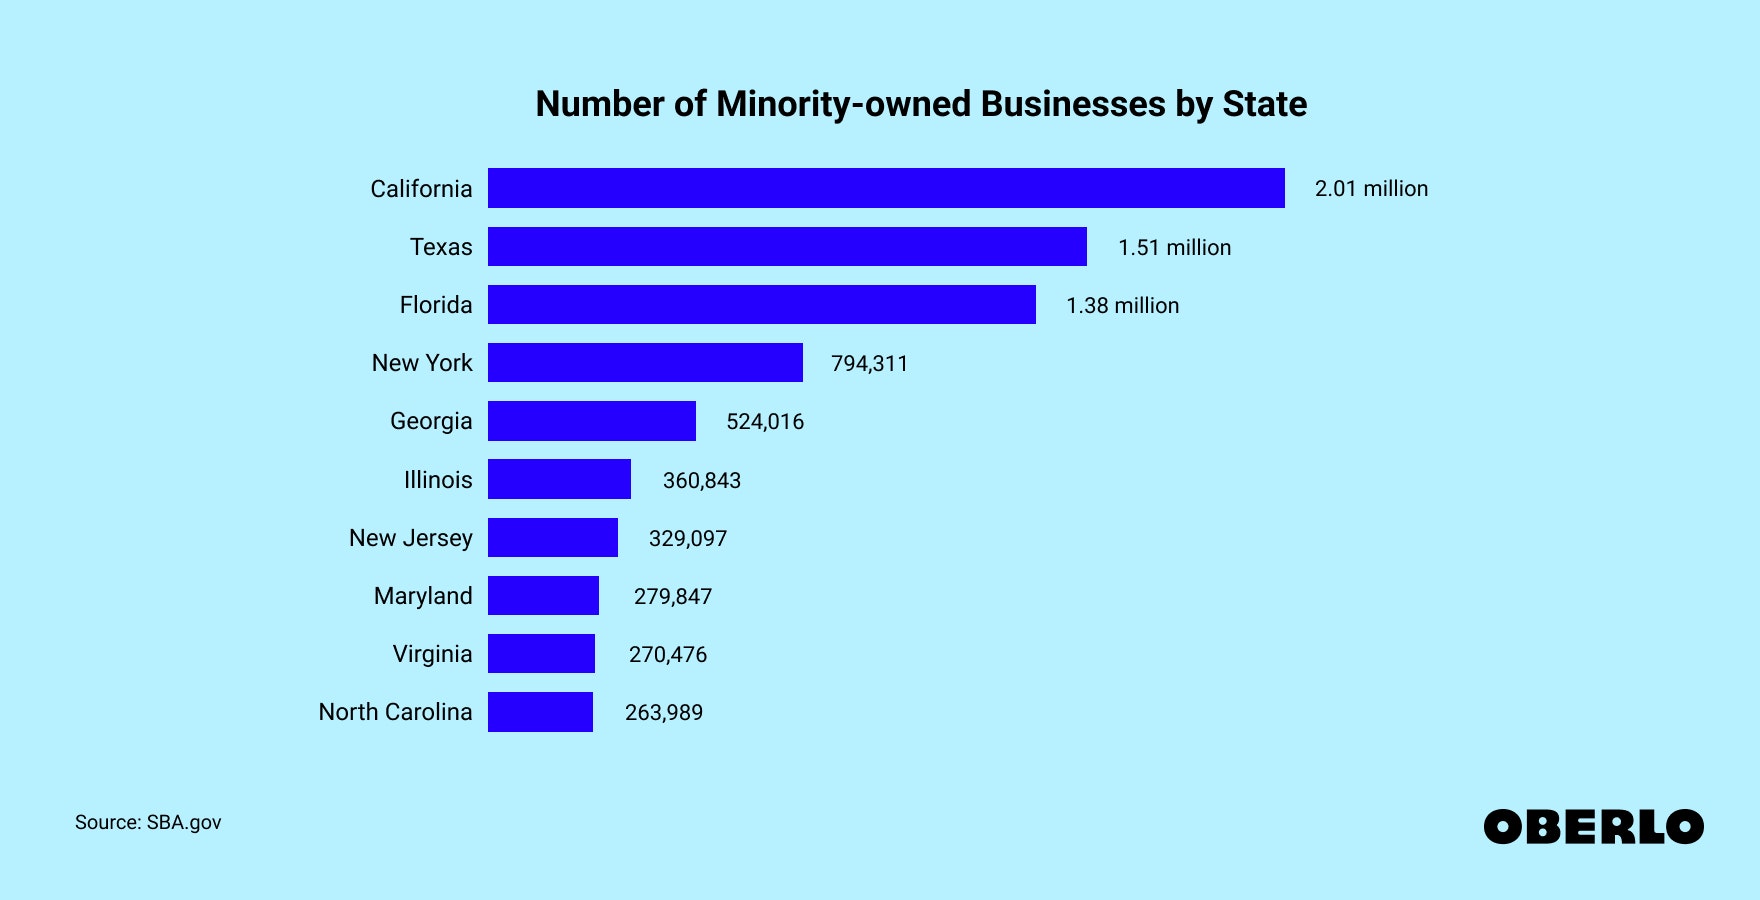 Chart showing the Number of Minority-owned Businesses by State